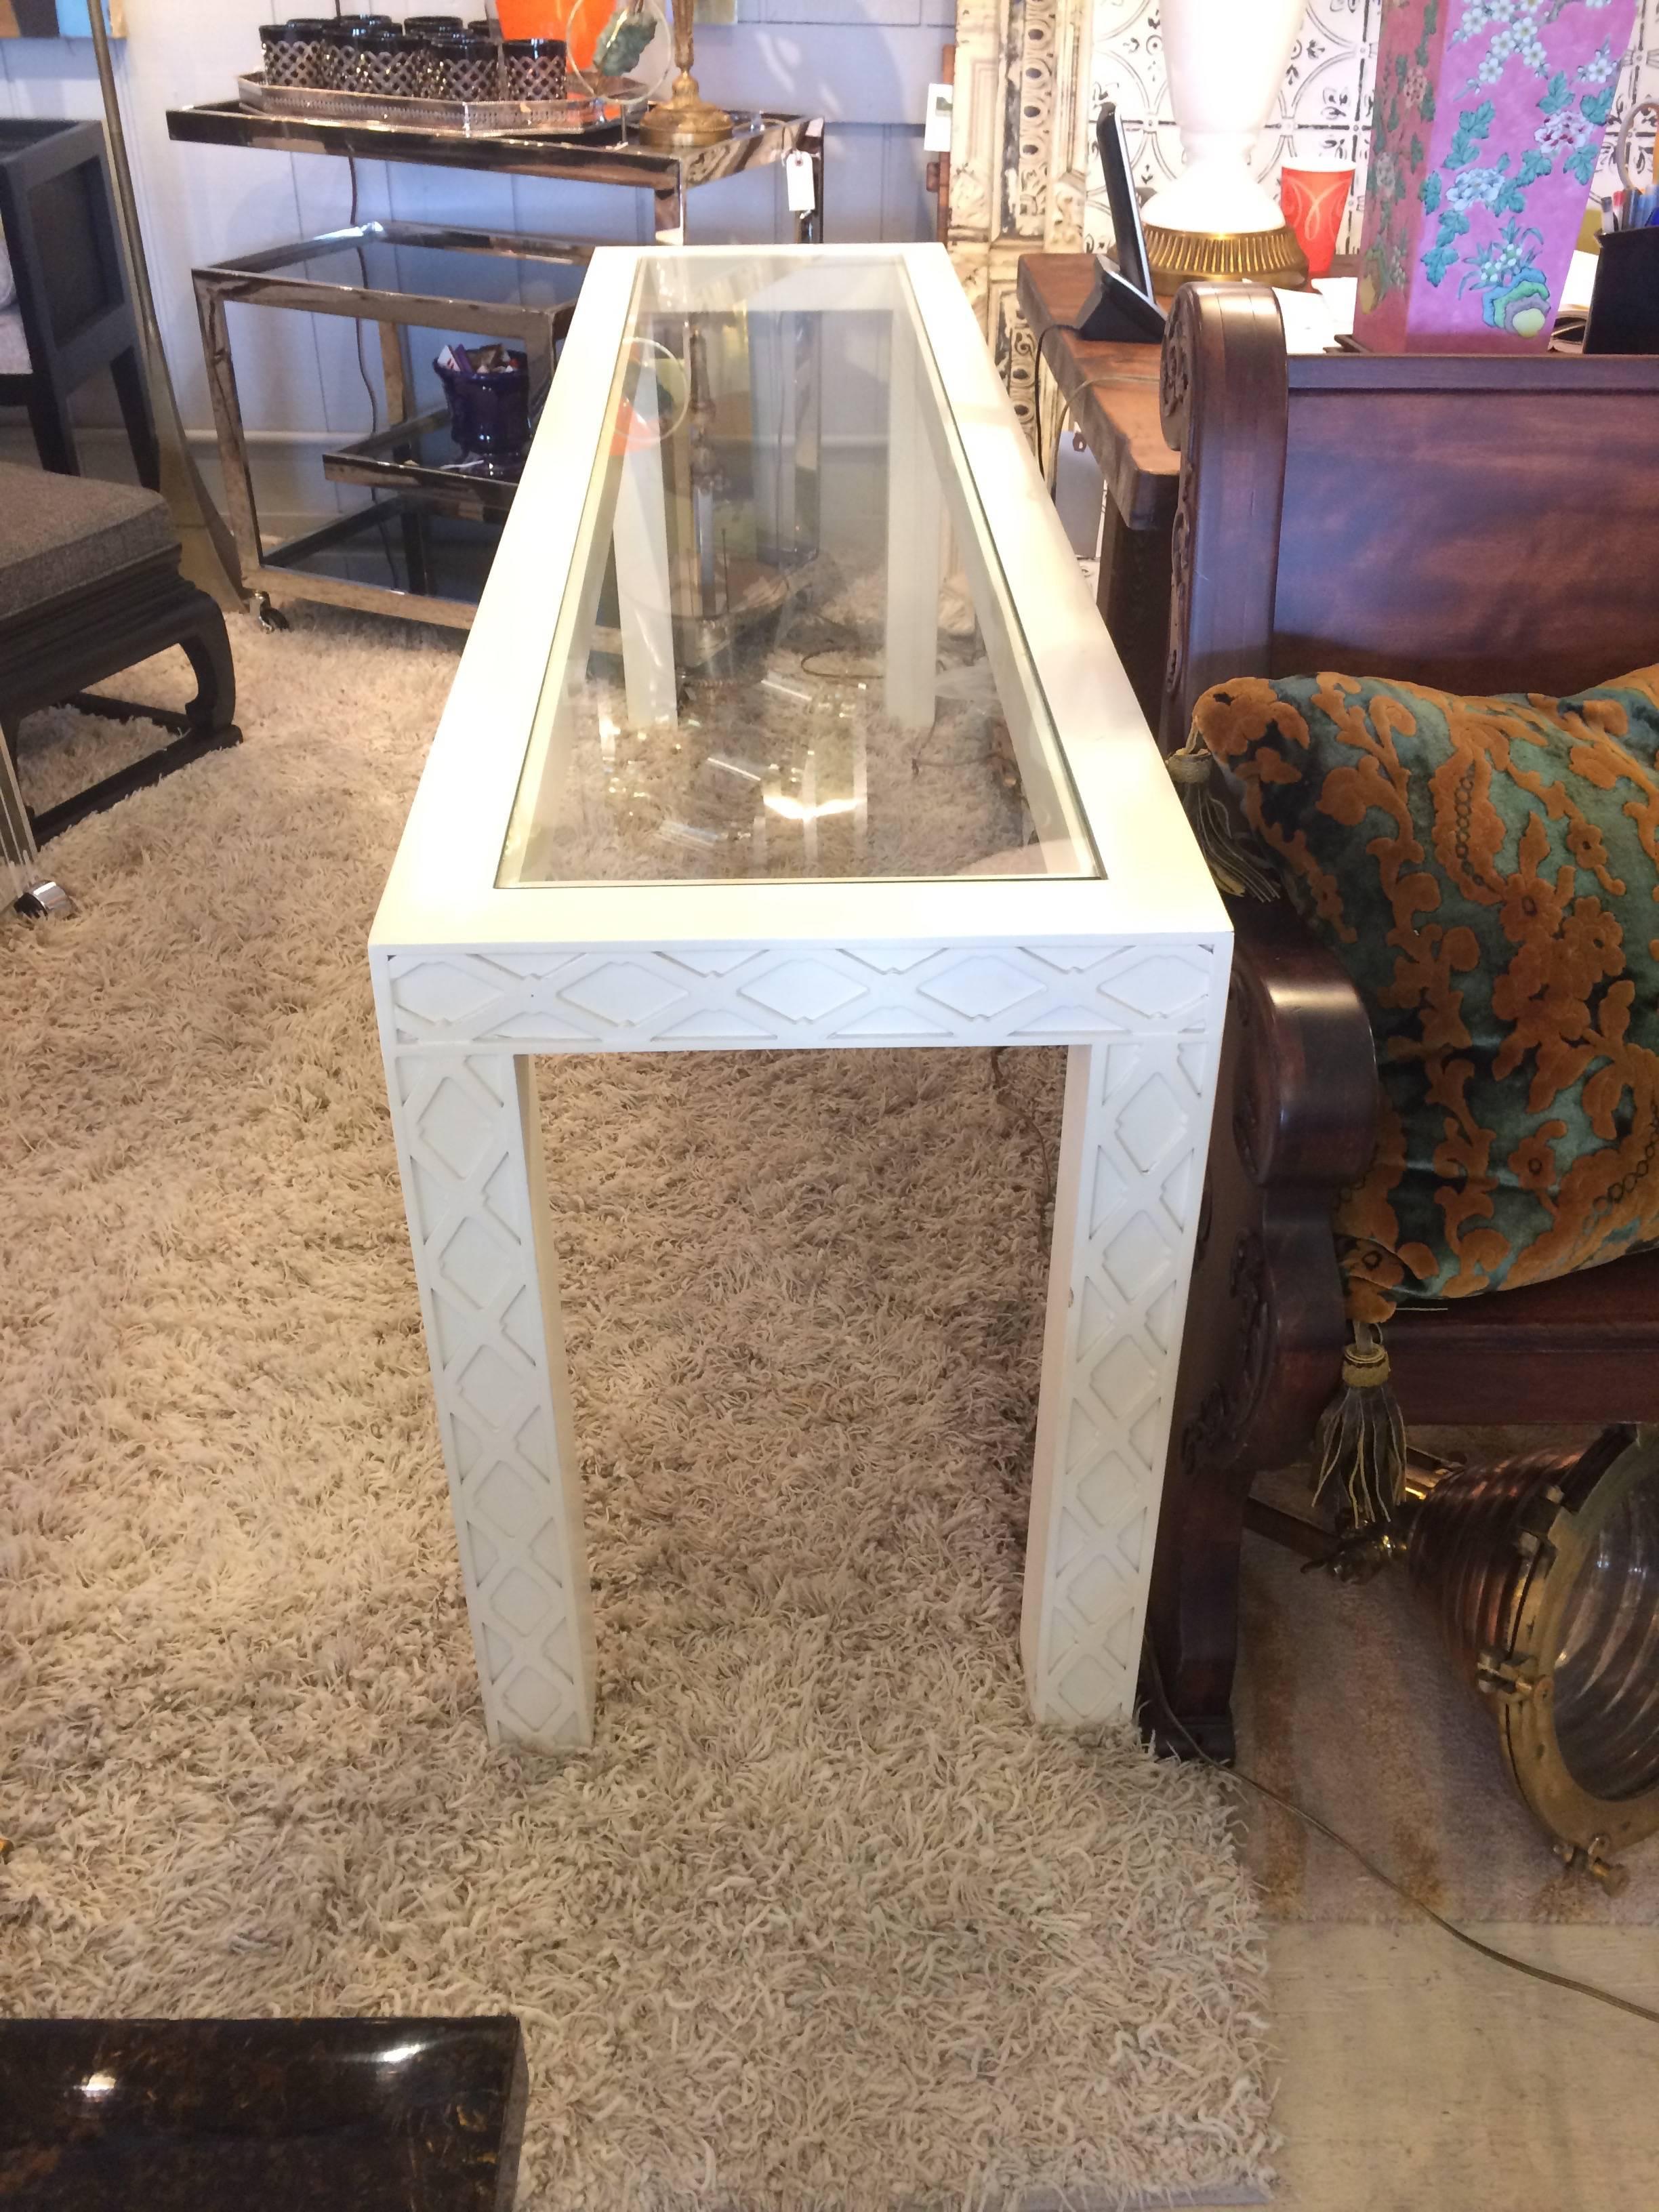 Parsons style Mid-Century Modern cream colored laquer console with decorative lattice style criss cross design around the edges. Glass top.